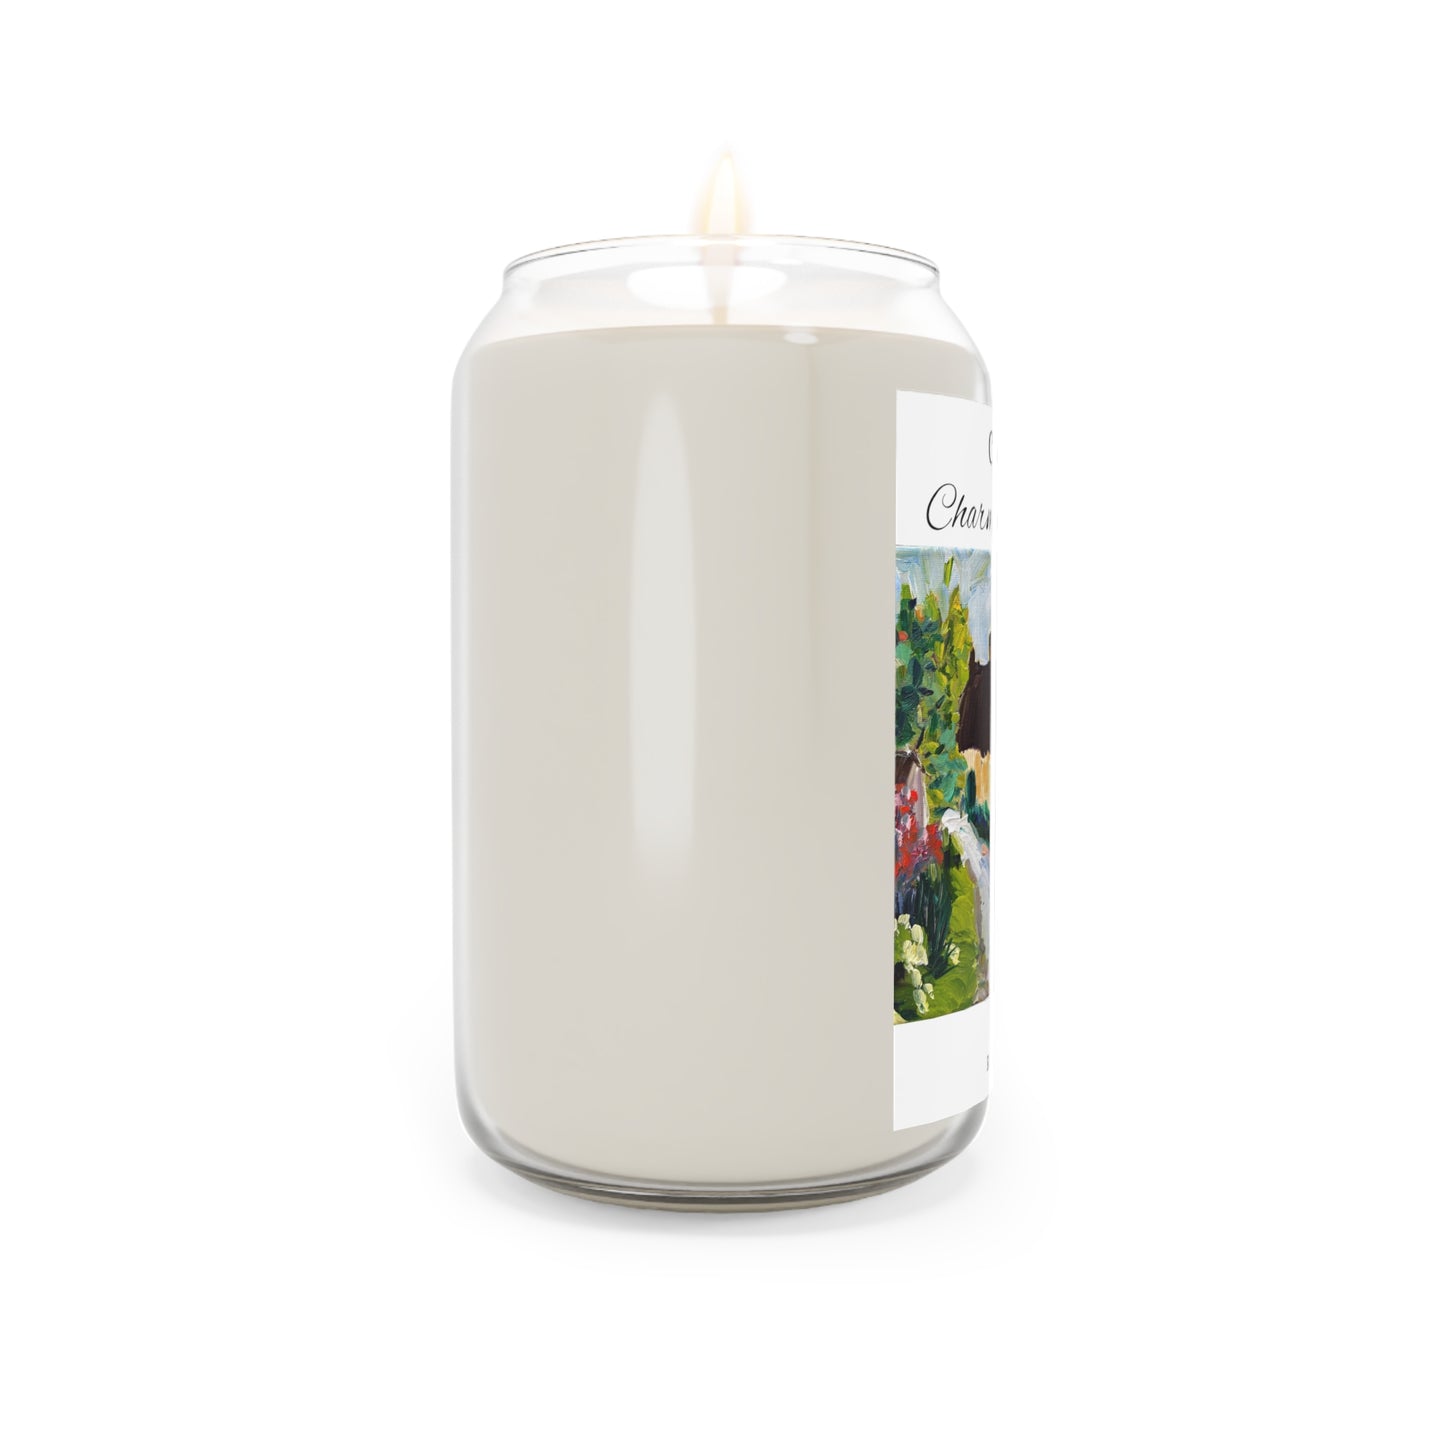 Charming Hideaway Cotswolds Scented Candle, 13.75oz